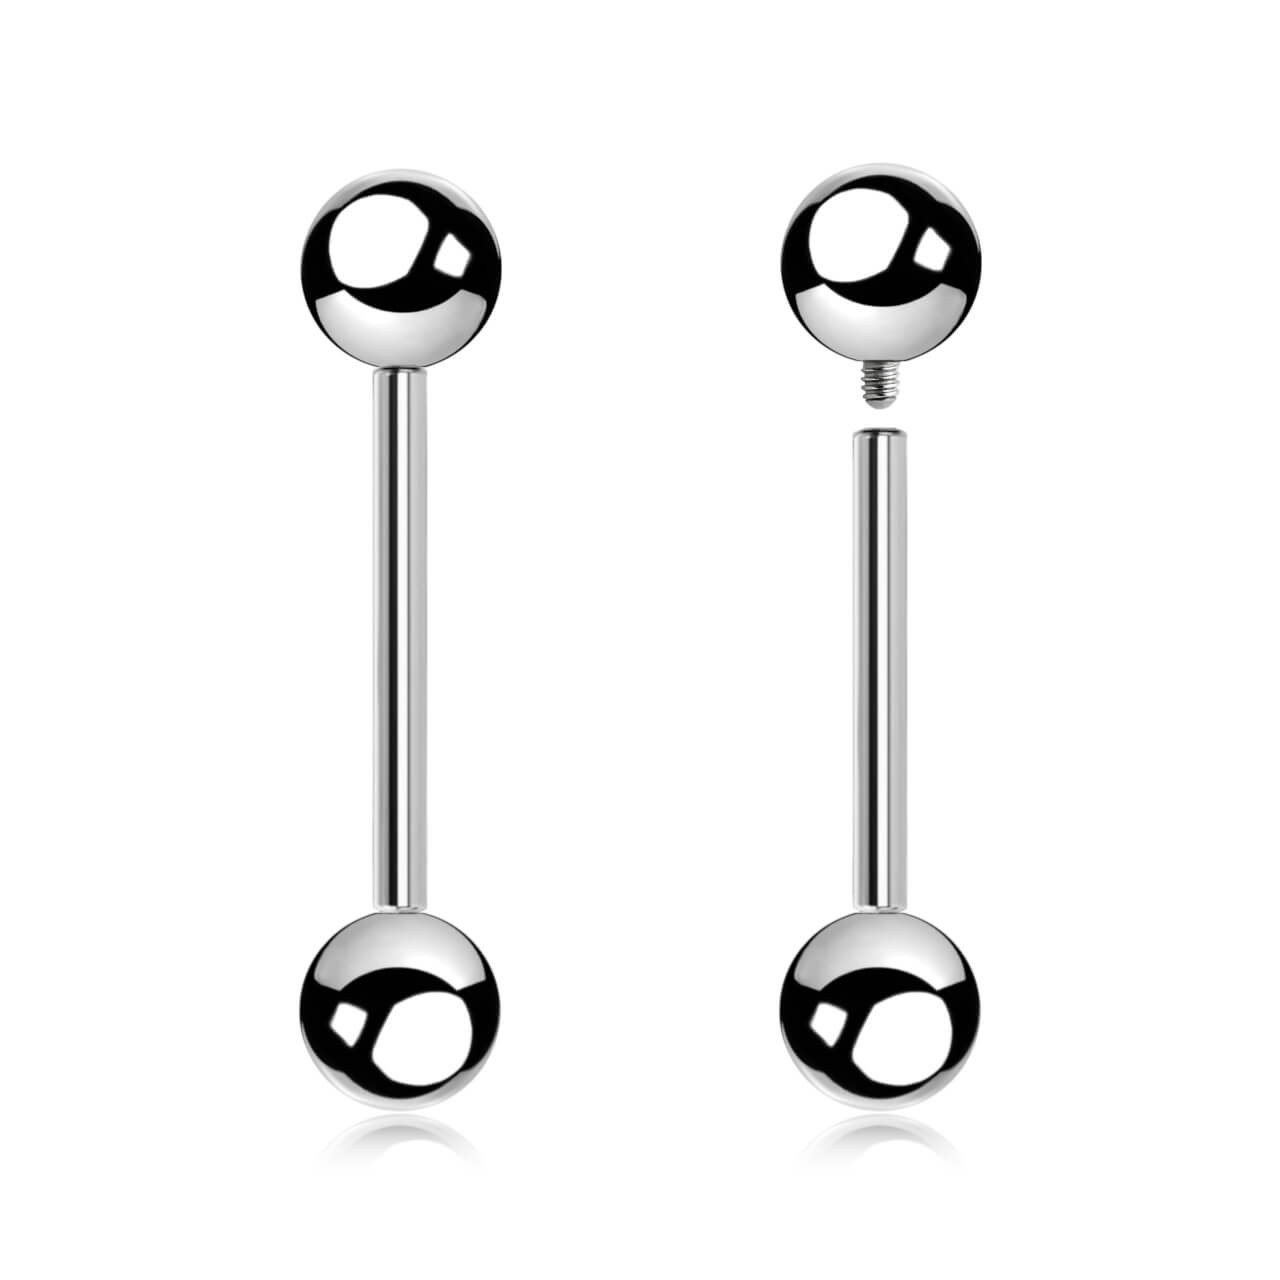 FBA16B6 Pack of 10 surgical steel internally threaded tongue barbells, Thickness 1.6mm, Ball size 6mm